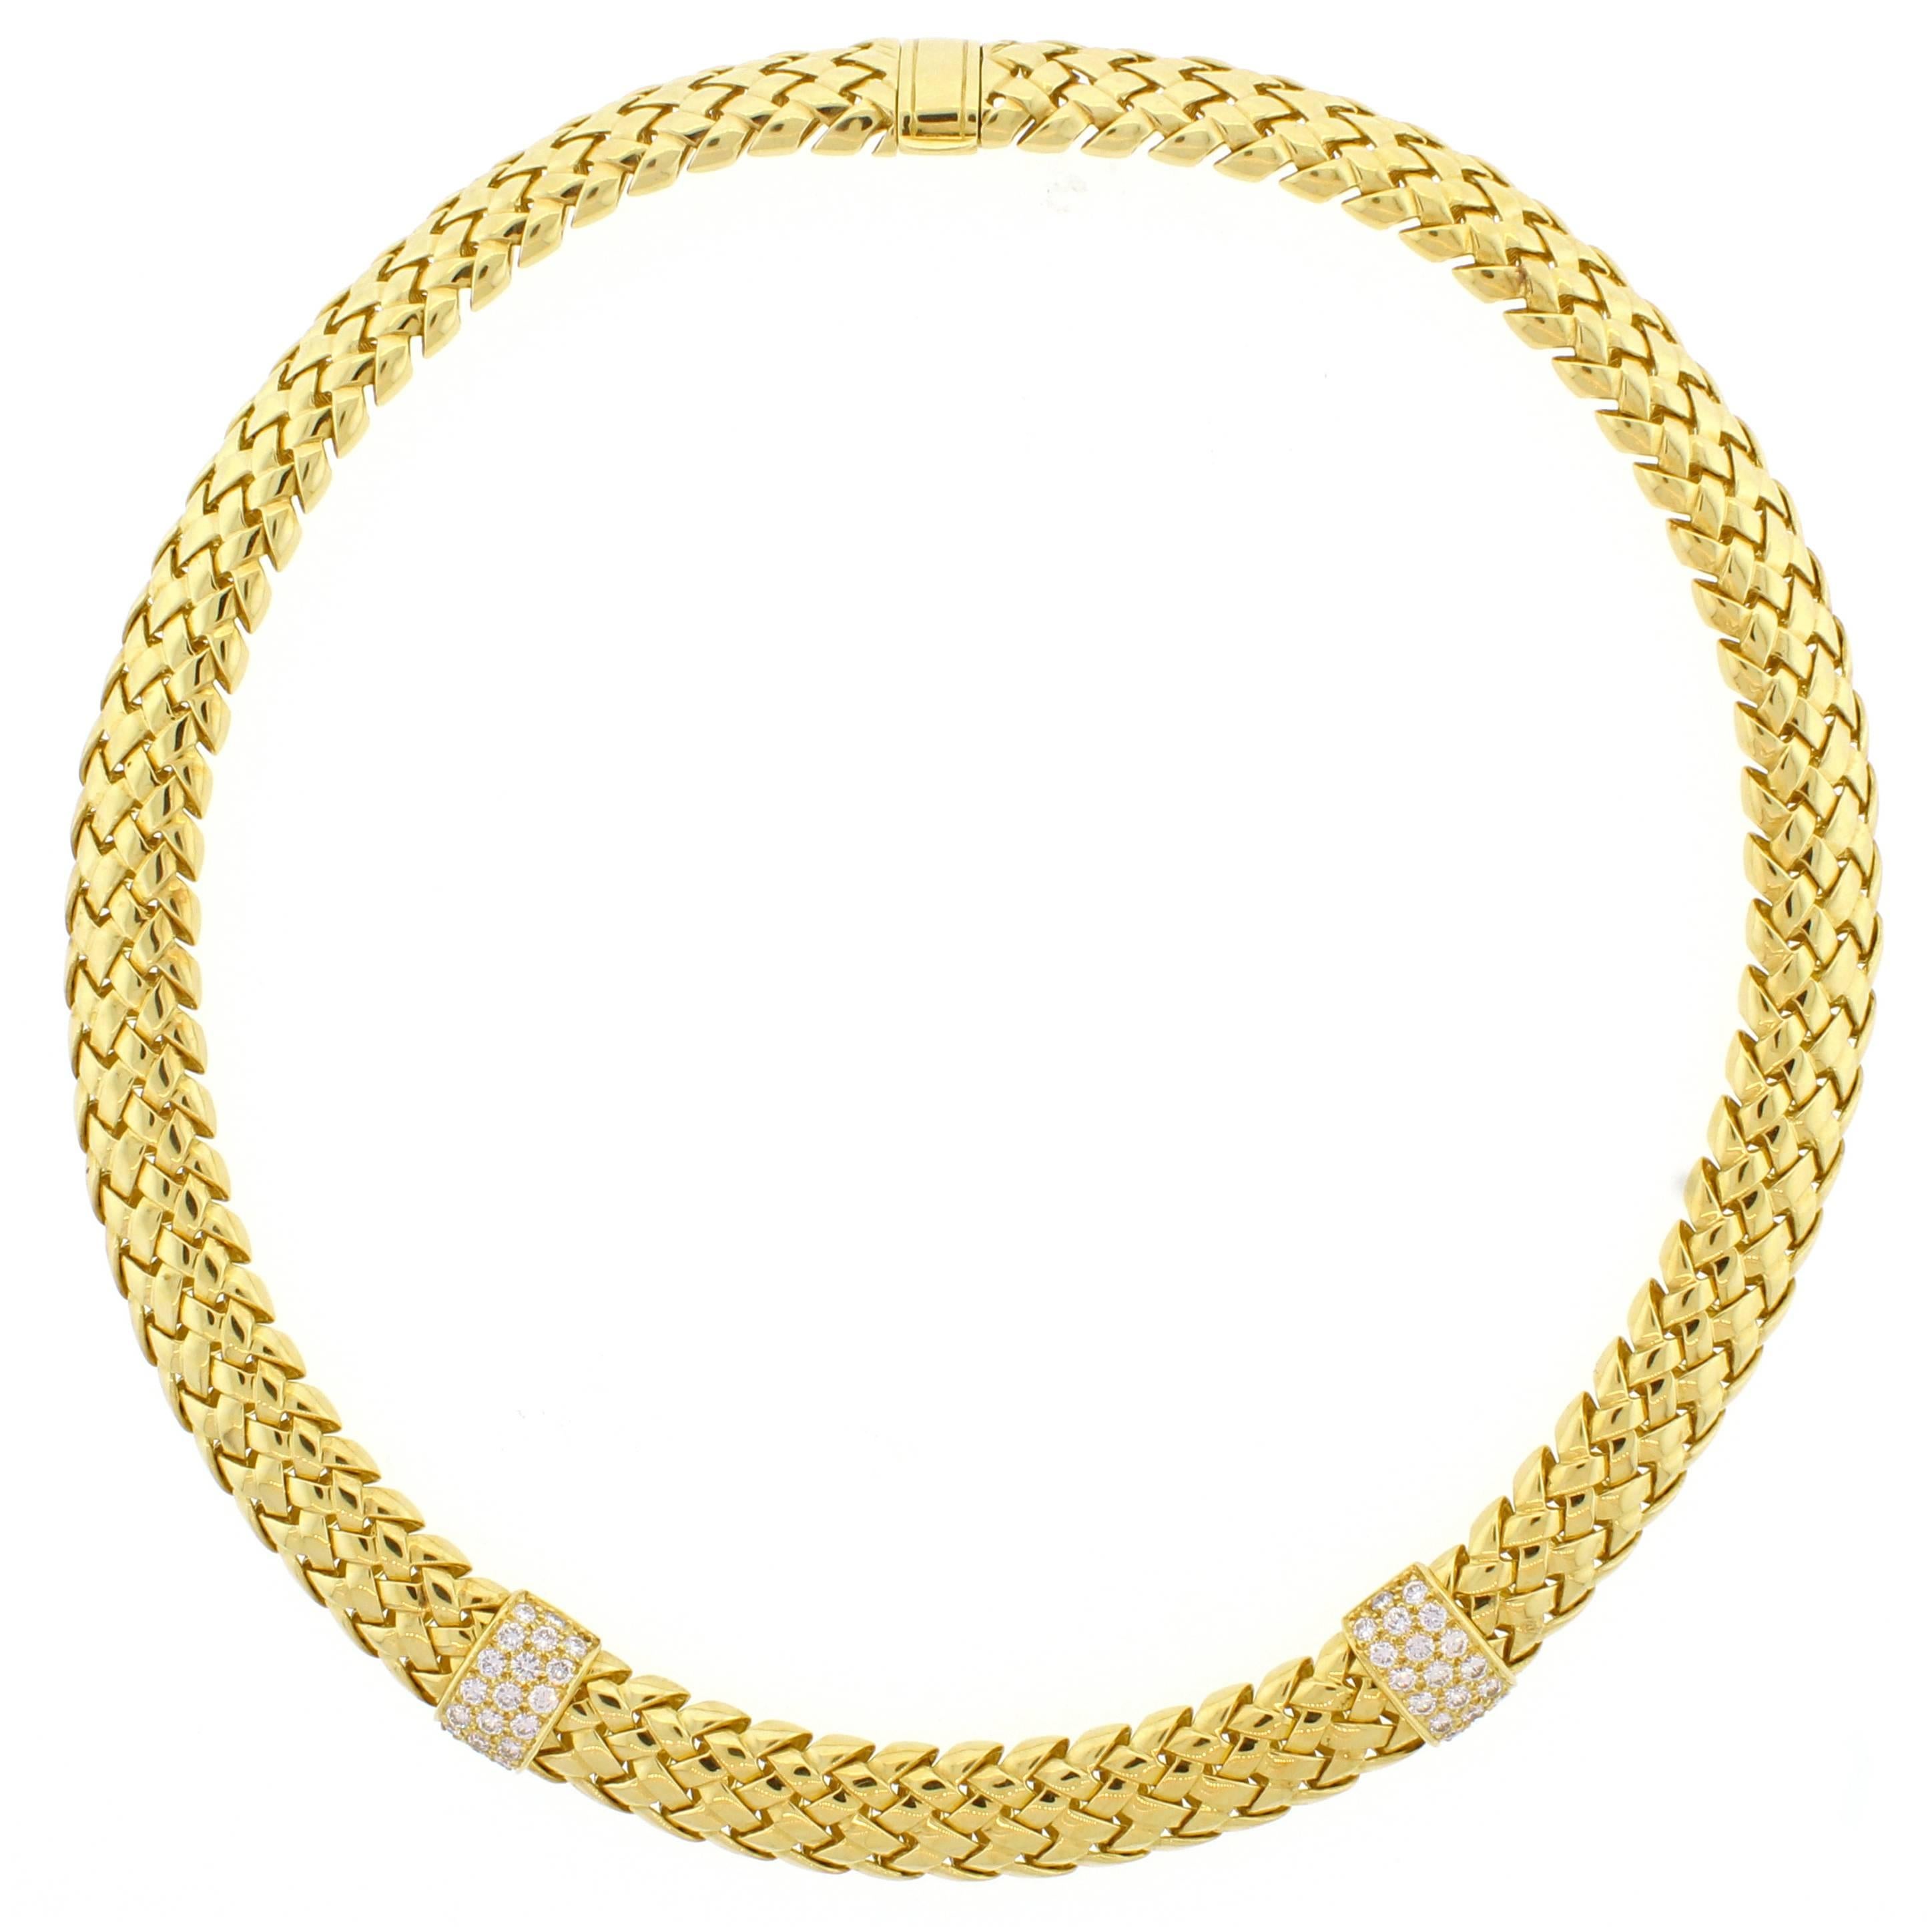 Tiffany & Co. Diamond Yellow Gold Vannerie Necklace